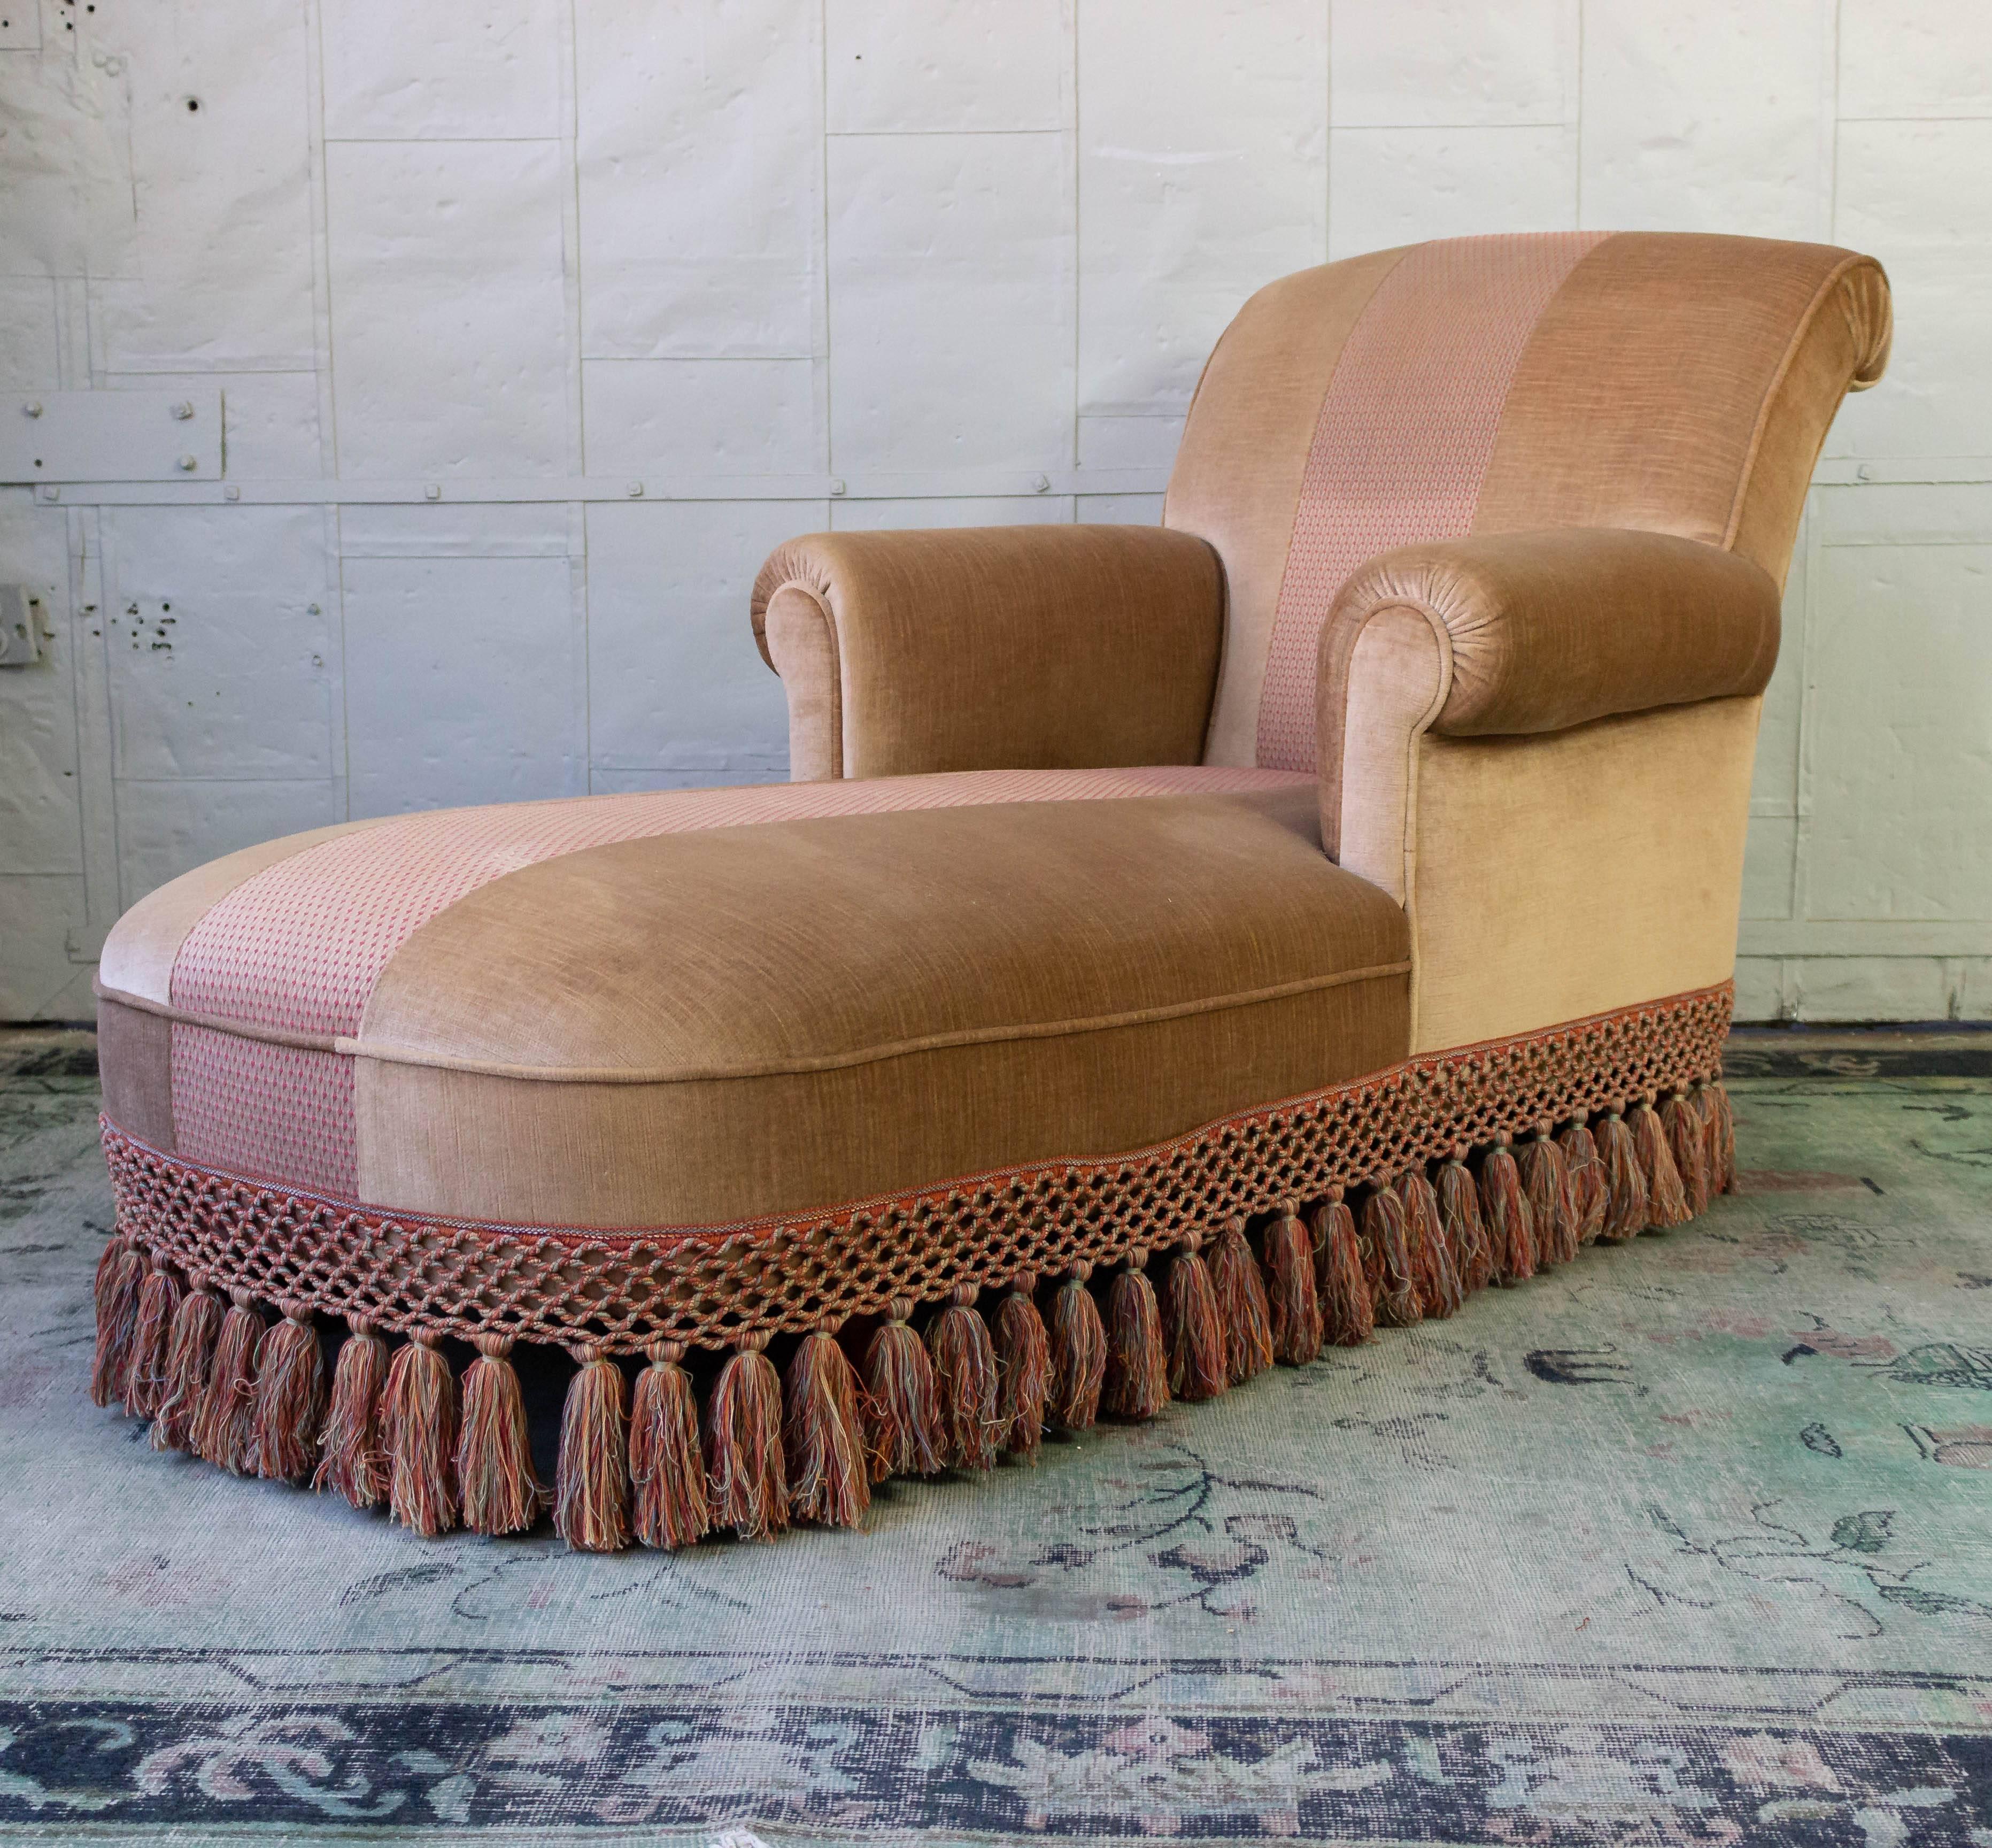 Chaise Longue With Contrasting Fabric and Trim 1